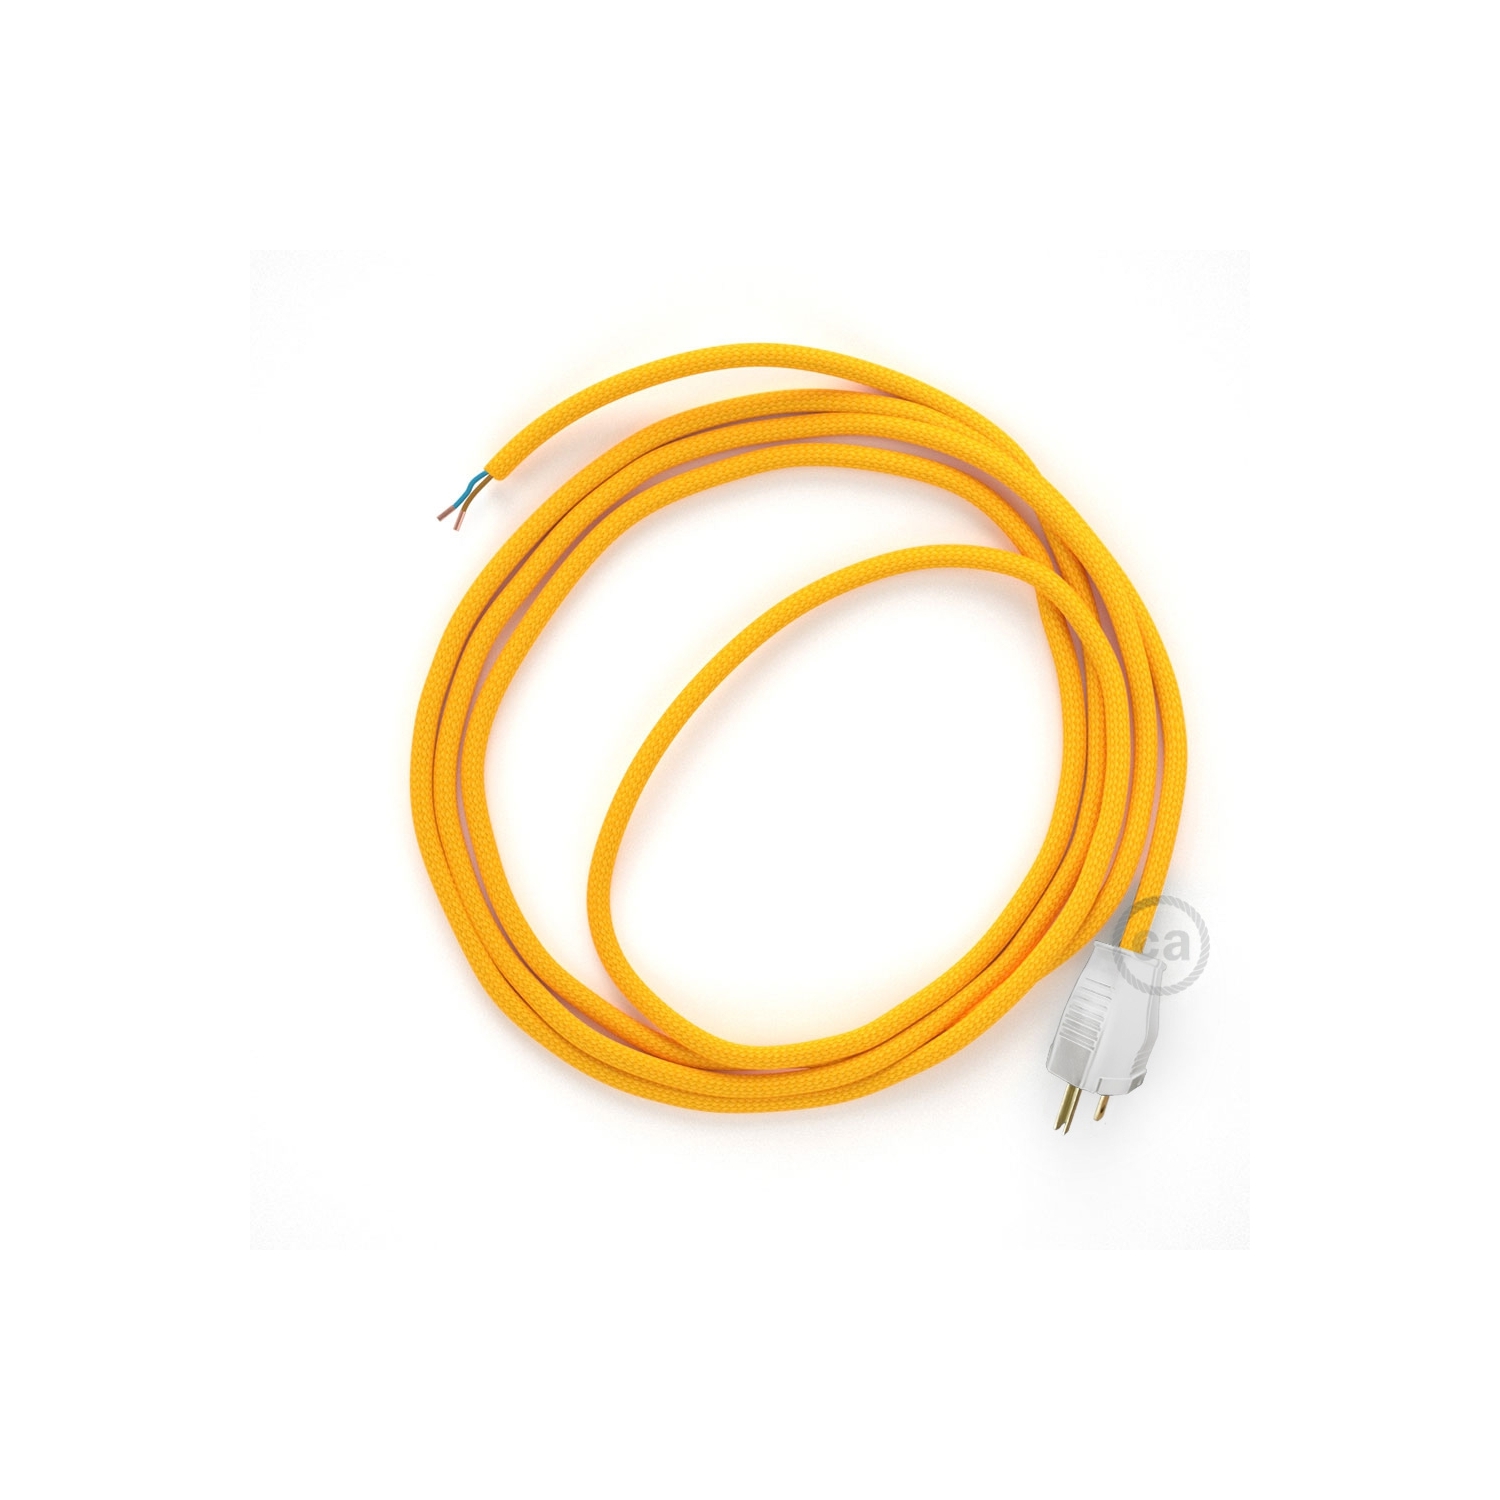 Cord-set - RM10 Yellow Rayon Covered Round Cable